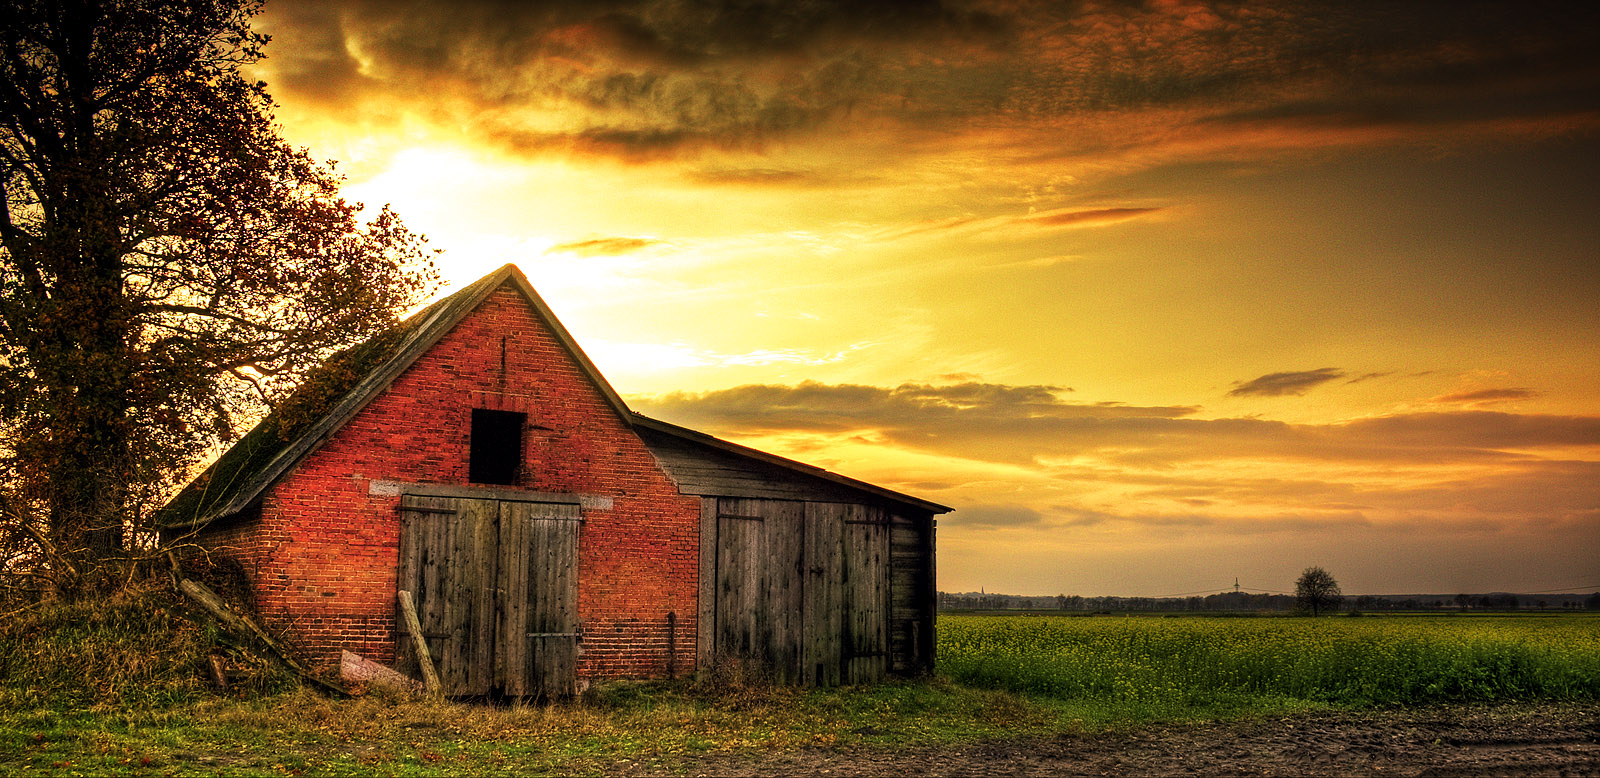 Old Barn Wallpaper By Nassimhasan